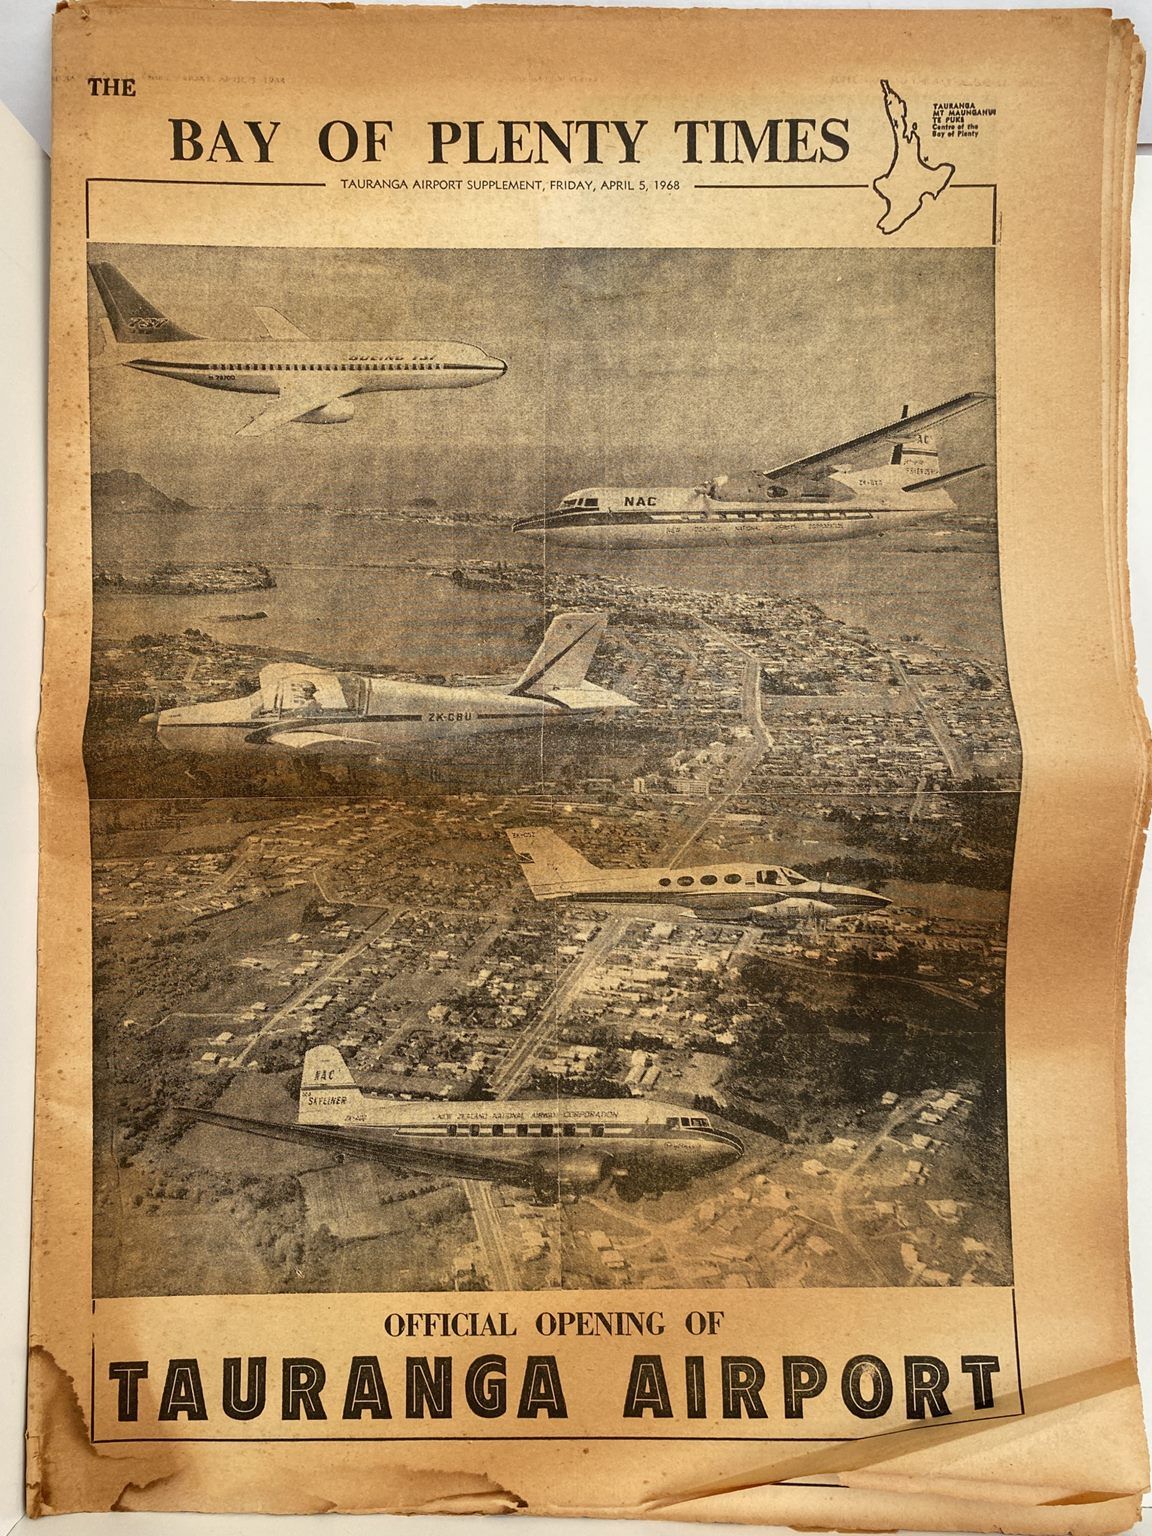 OLD NEWSPAPER: The Bay of Plenty Times - Opening of Tauranga Airport 1968